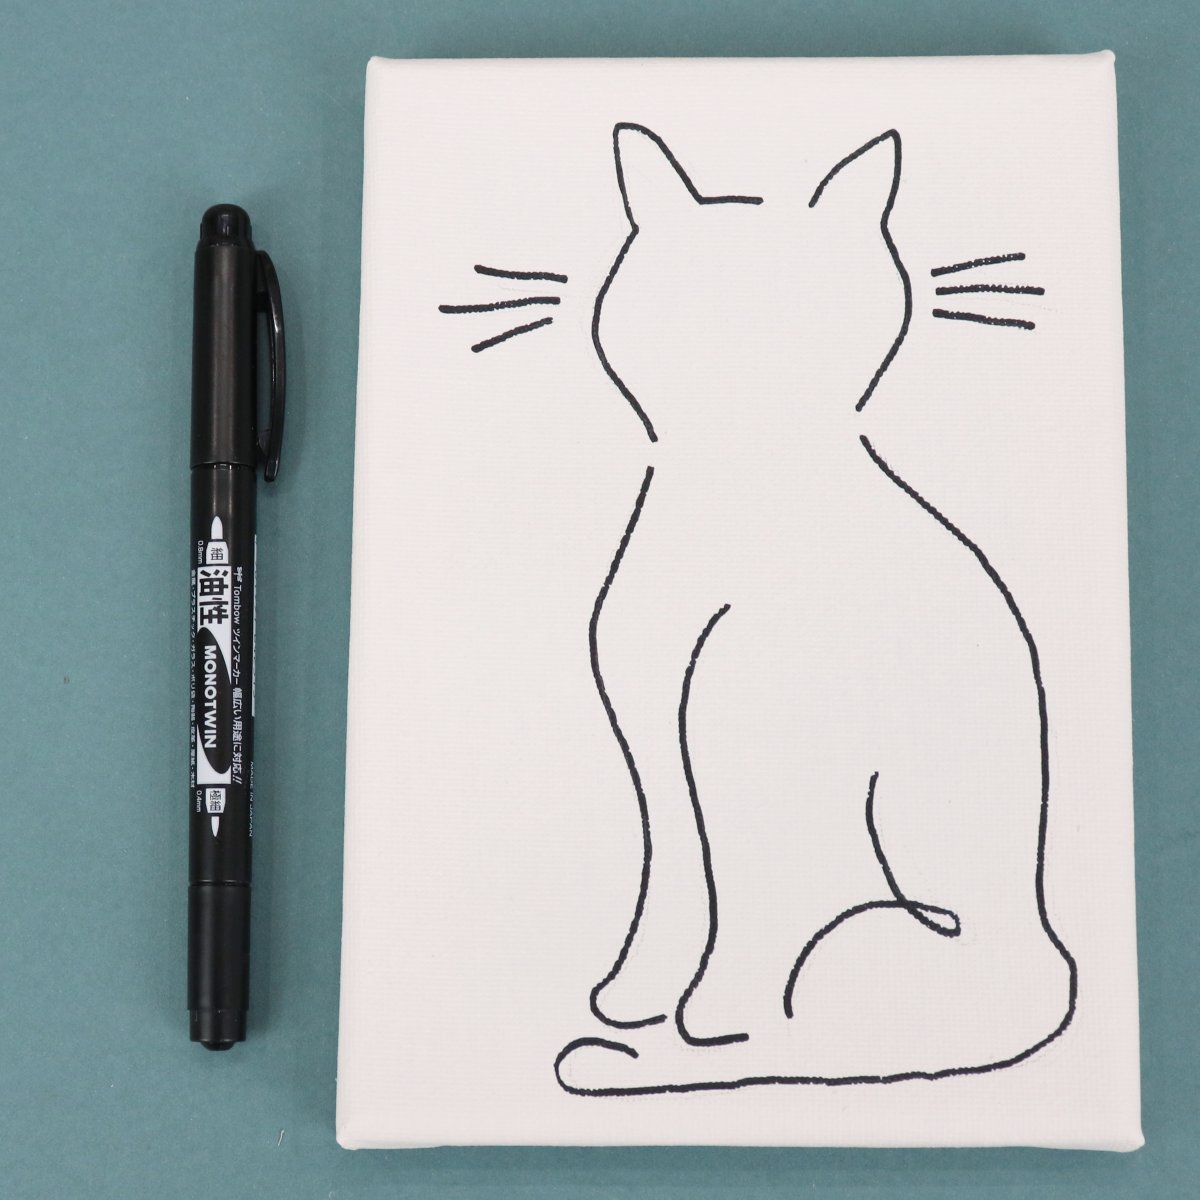 Image contains a white canvas with a line drawing of a seated cat. It is on a teal background with a Tombow MONO Twin marker next to it.